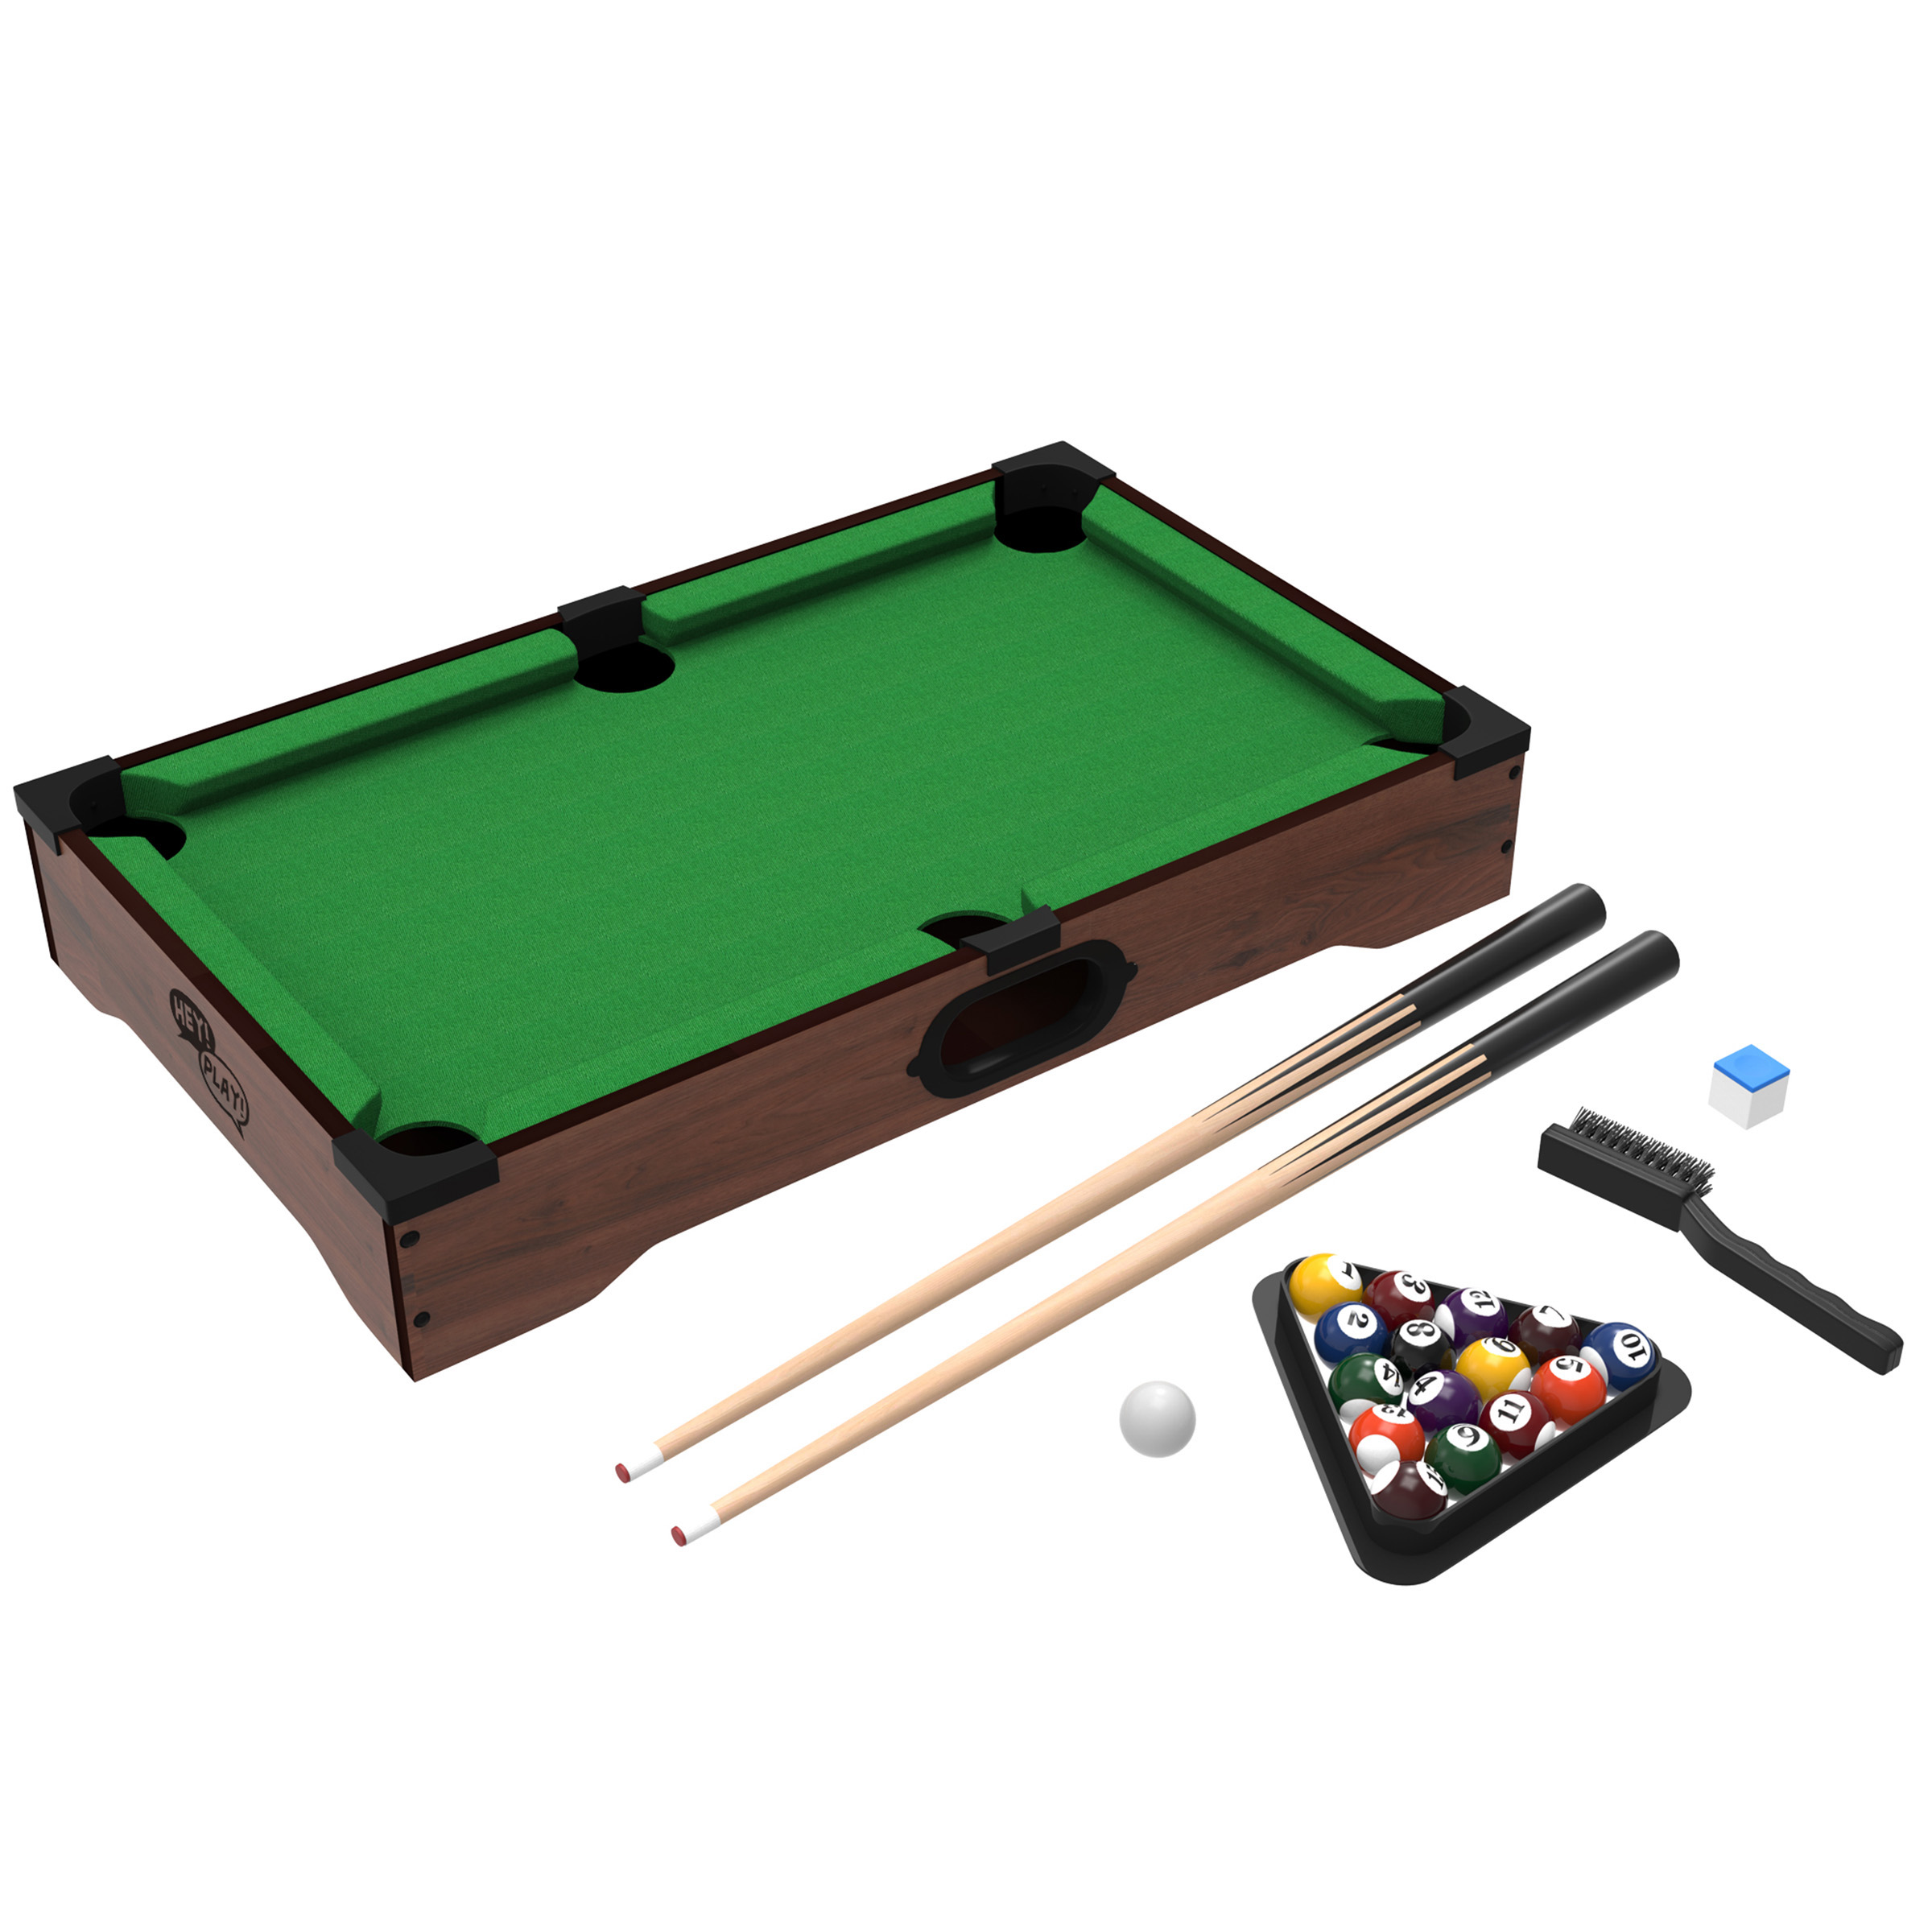 Trademark Games Mini Pool Table Set with Sticks, Cue Balls, Chalk, and More - image 1 of 6